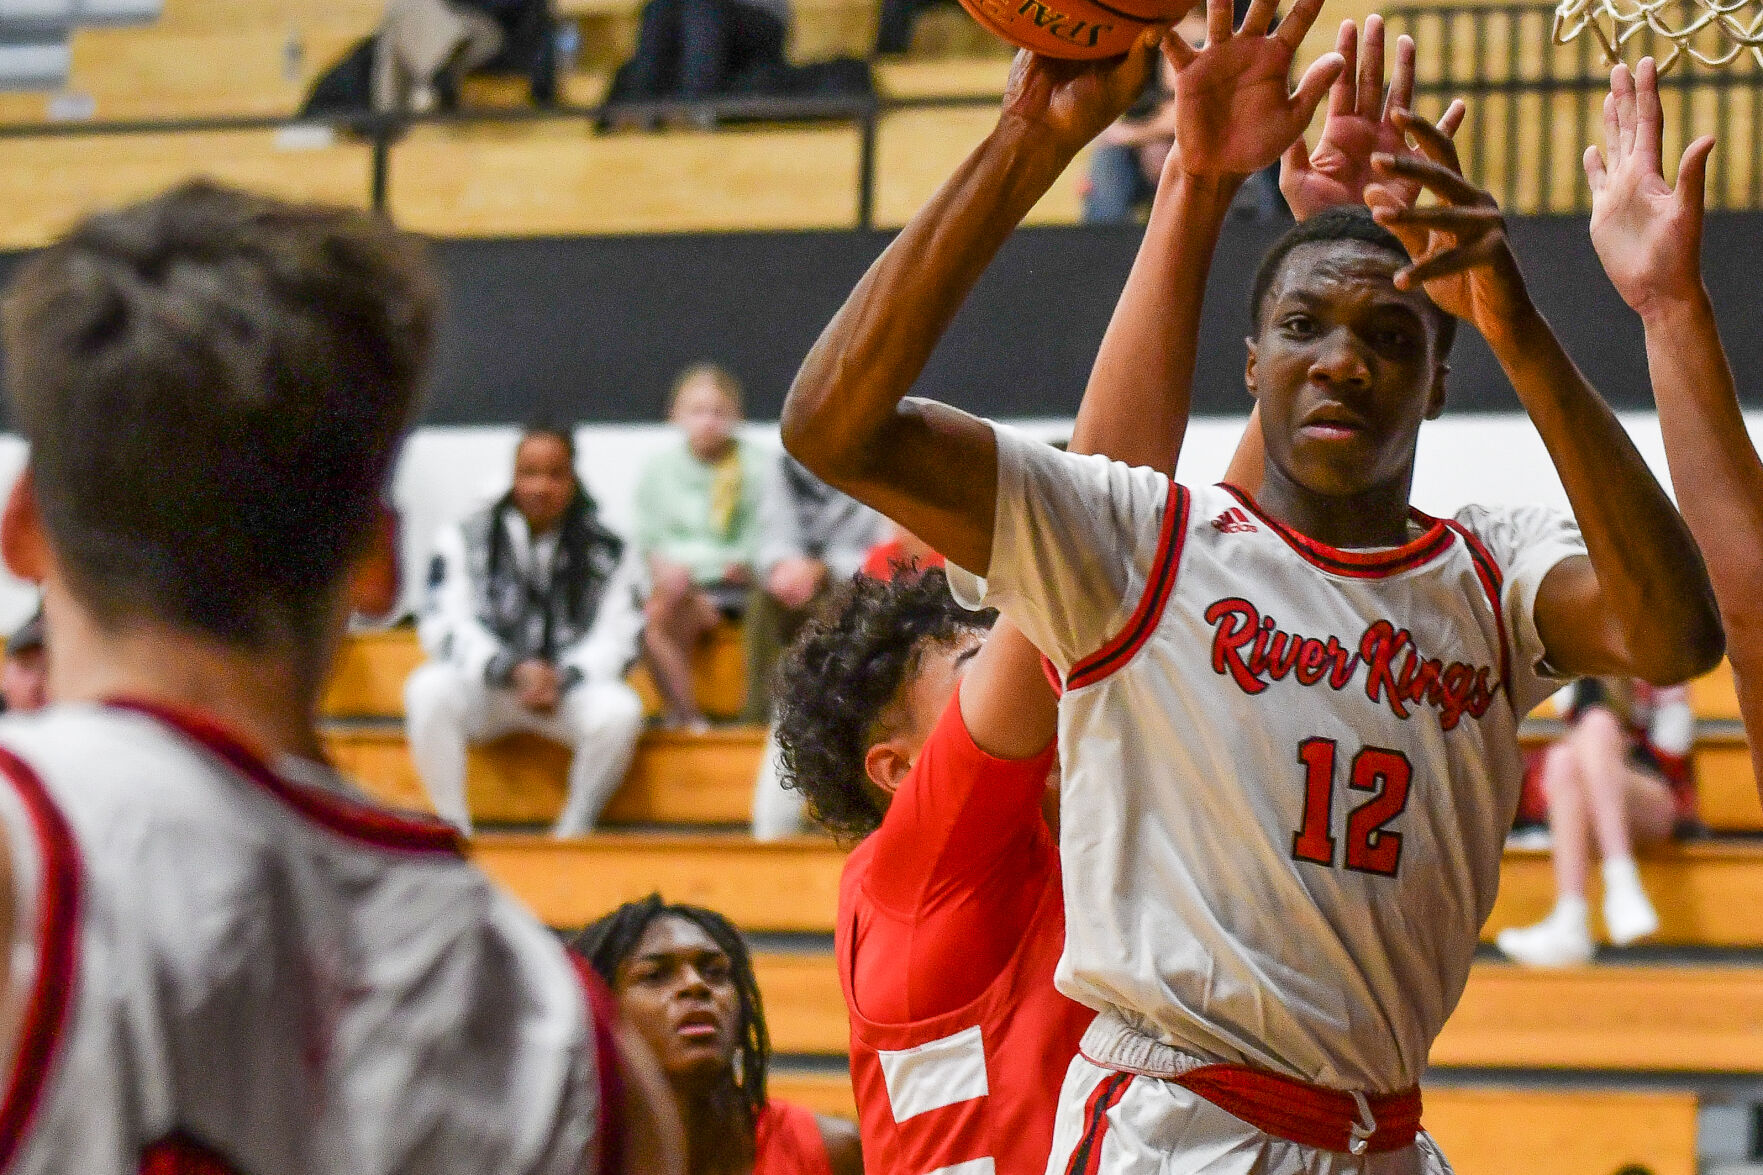 High School Basketball Update: Glance at Recent Match Results and Team Performances